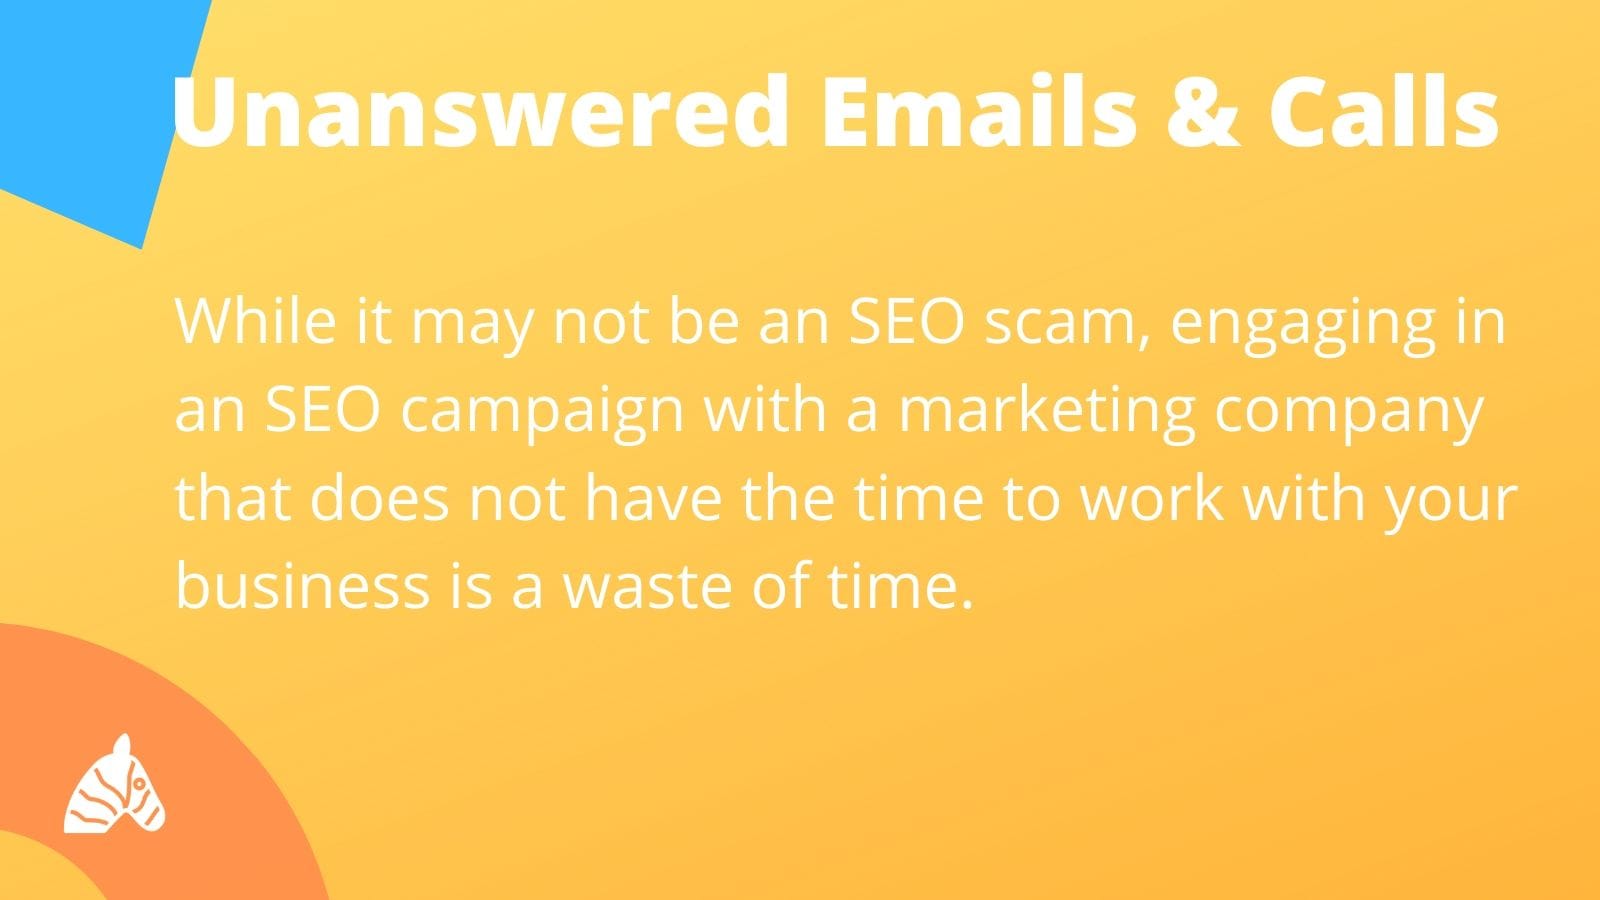 signs of an SEO scam - unanswered emails and calls